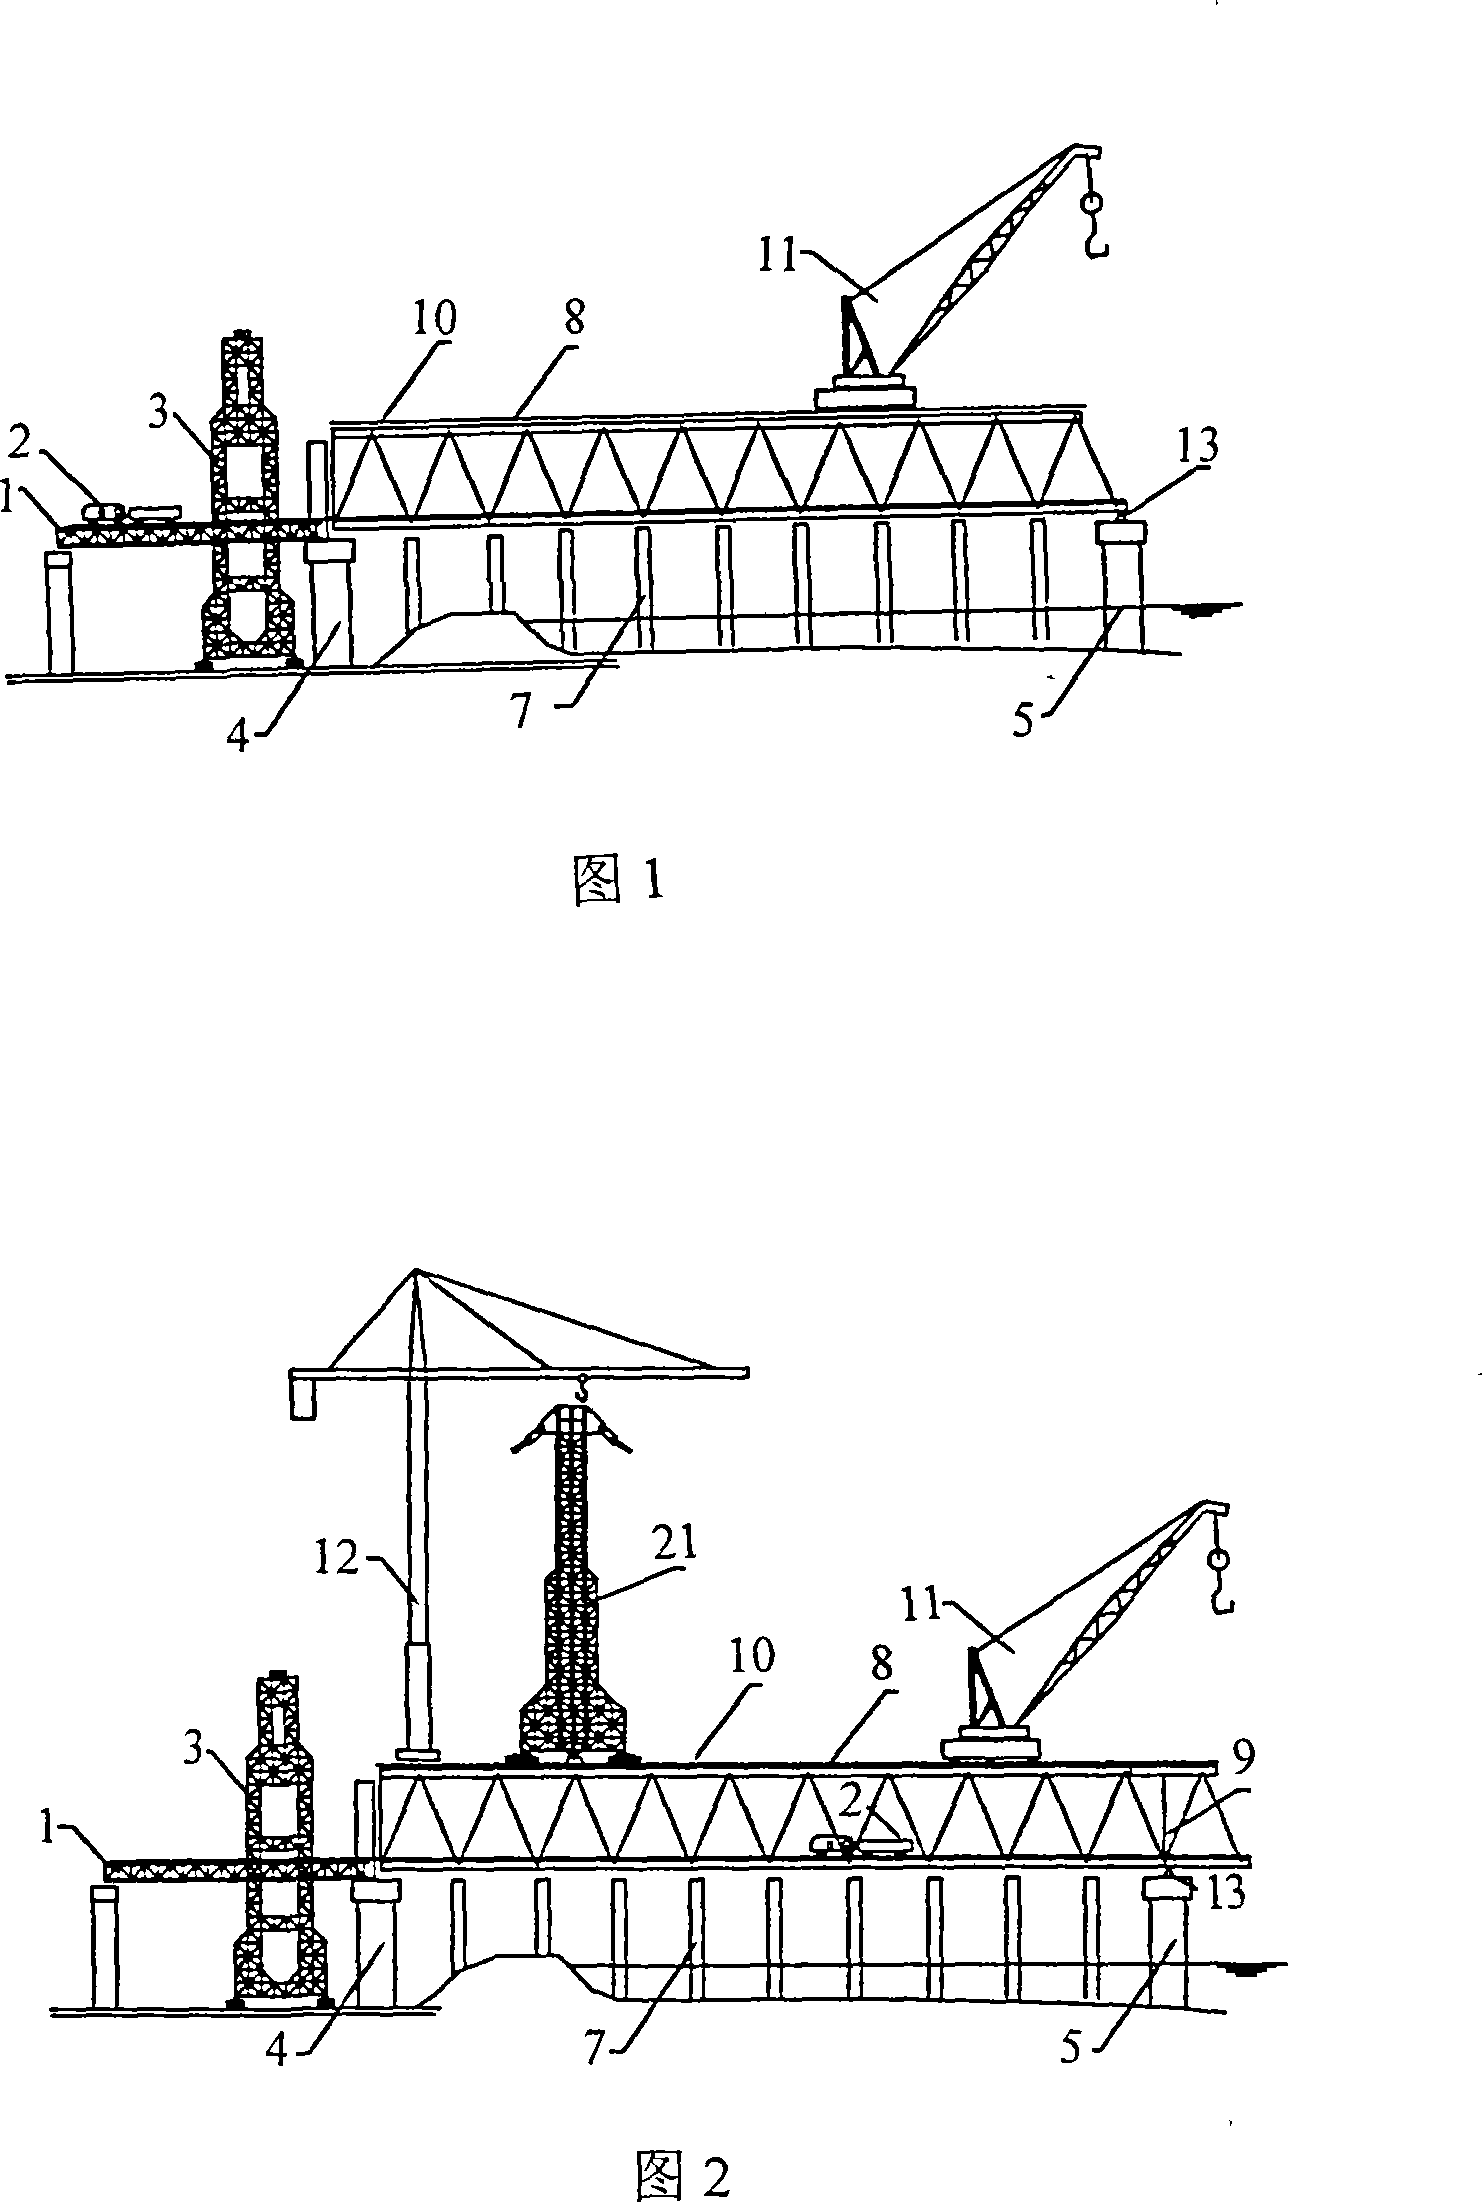 Method and system for erecting steel trusses by stay cable auxiliary complete cantilever